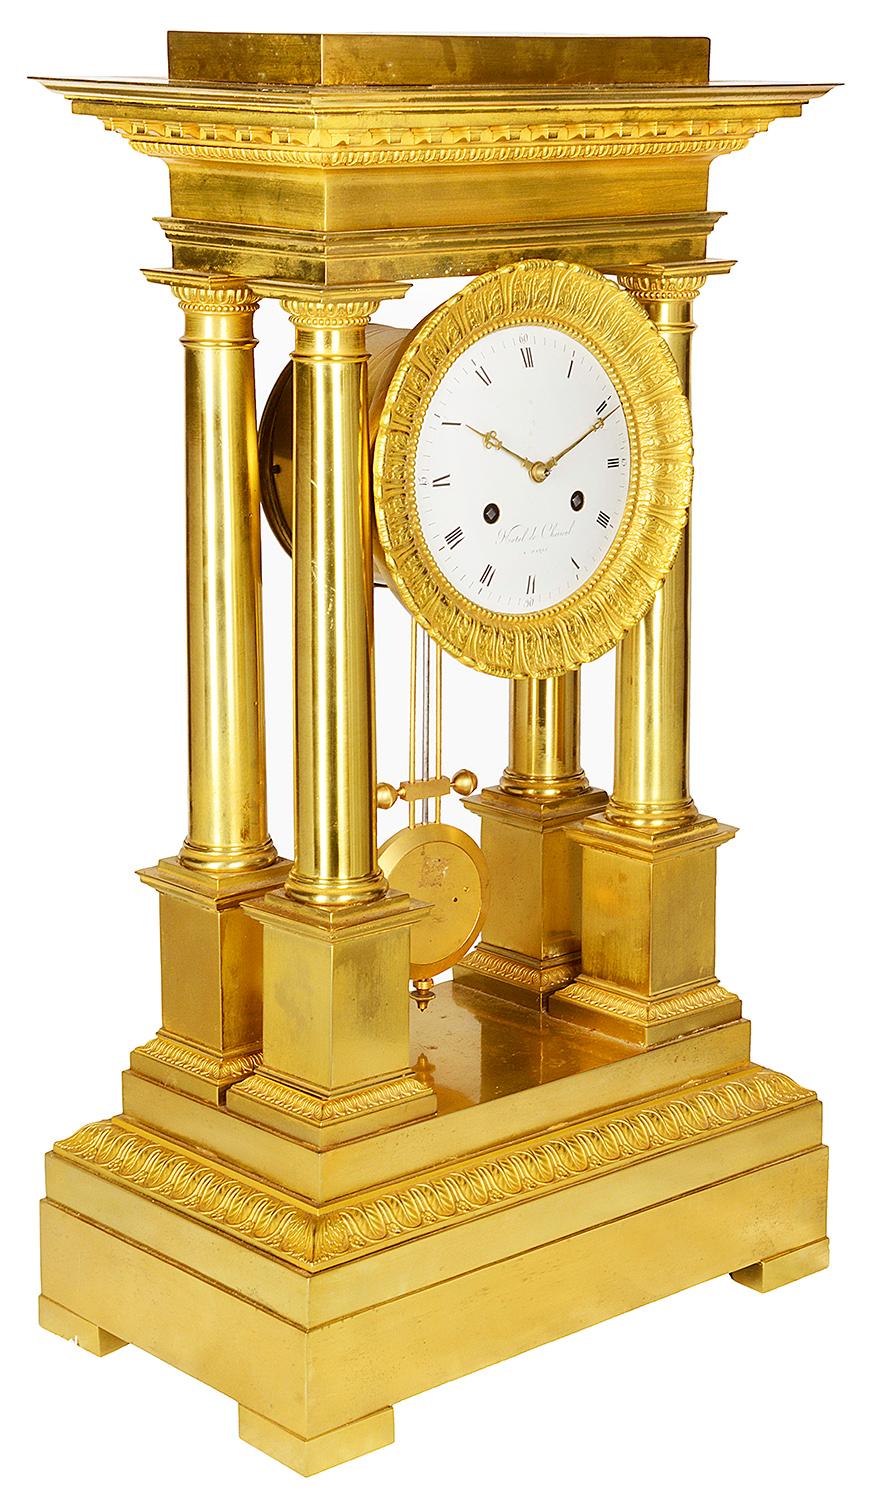 A very good quality 19th century French gilded ormolu Empire style mantel clock, having four classical column supports to the white enamel clock face with roman numerals, sticks on the hour and half hour with an eight day duration. Mounted on a